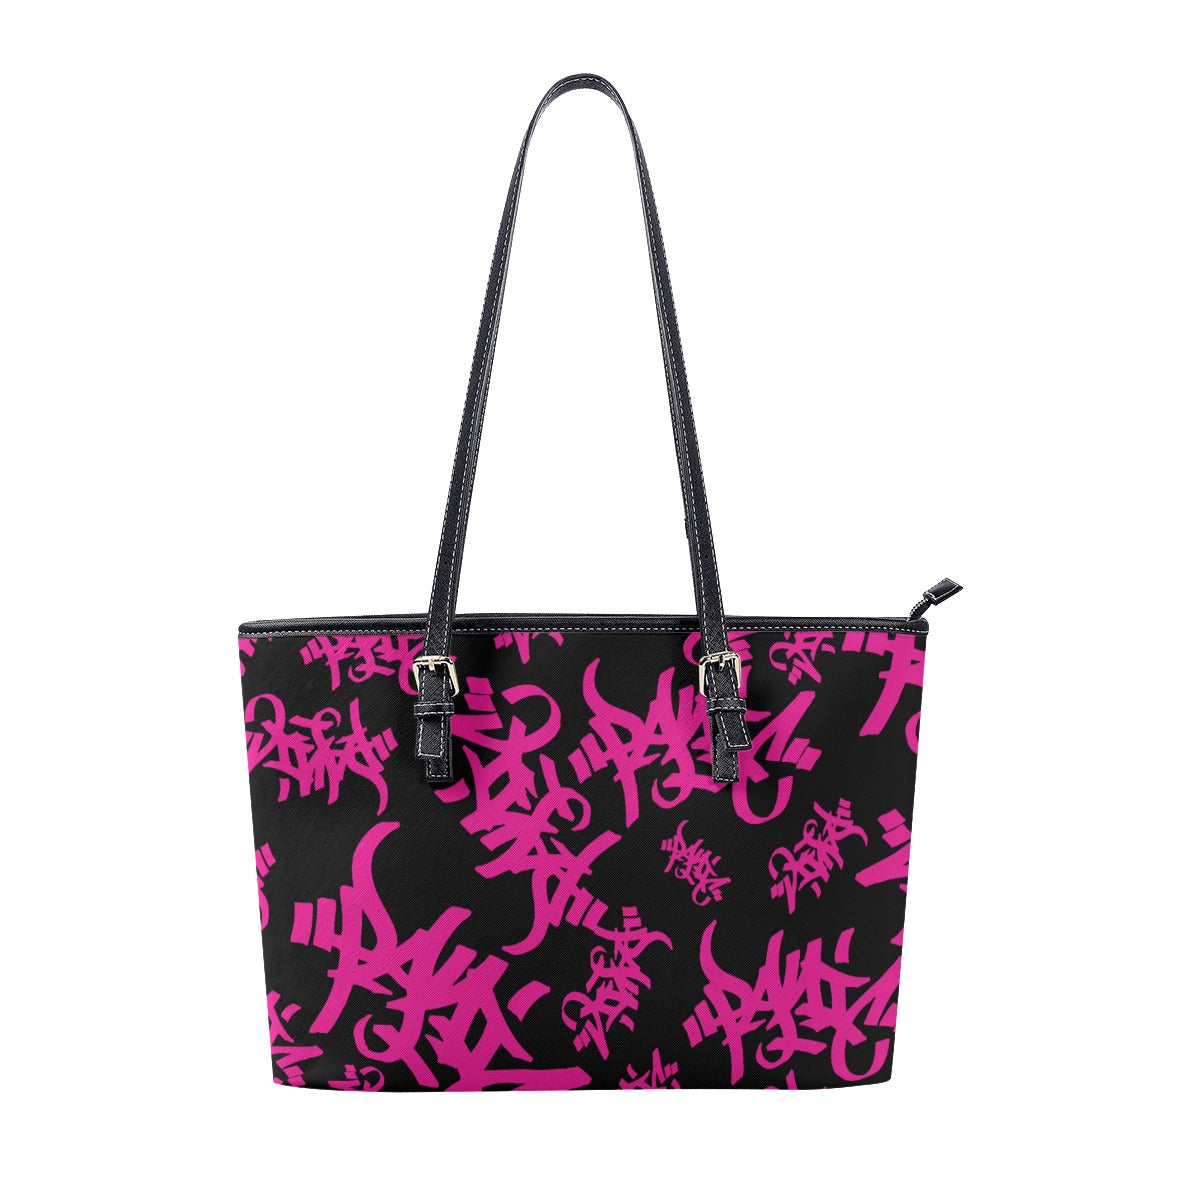 THE TAG FAUX LEATHER TOTE BAG - BLACK/HOT PINK - Panic 39